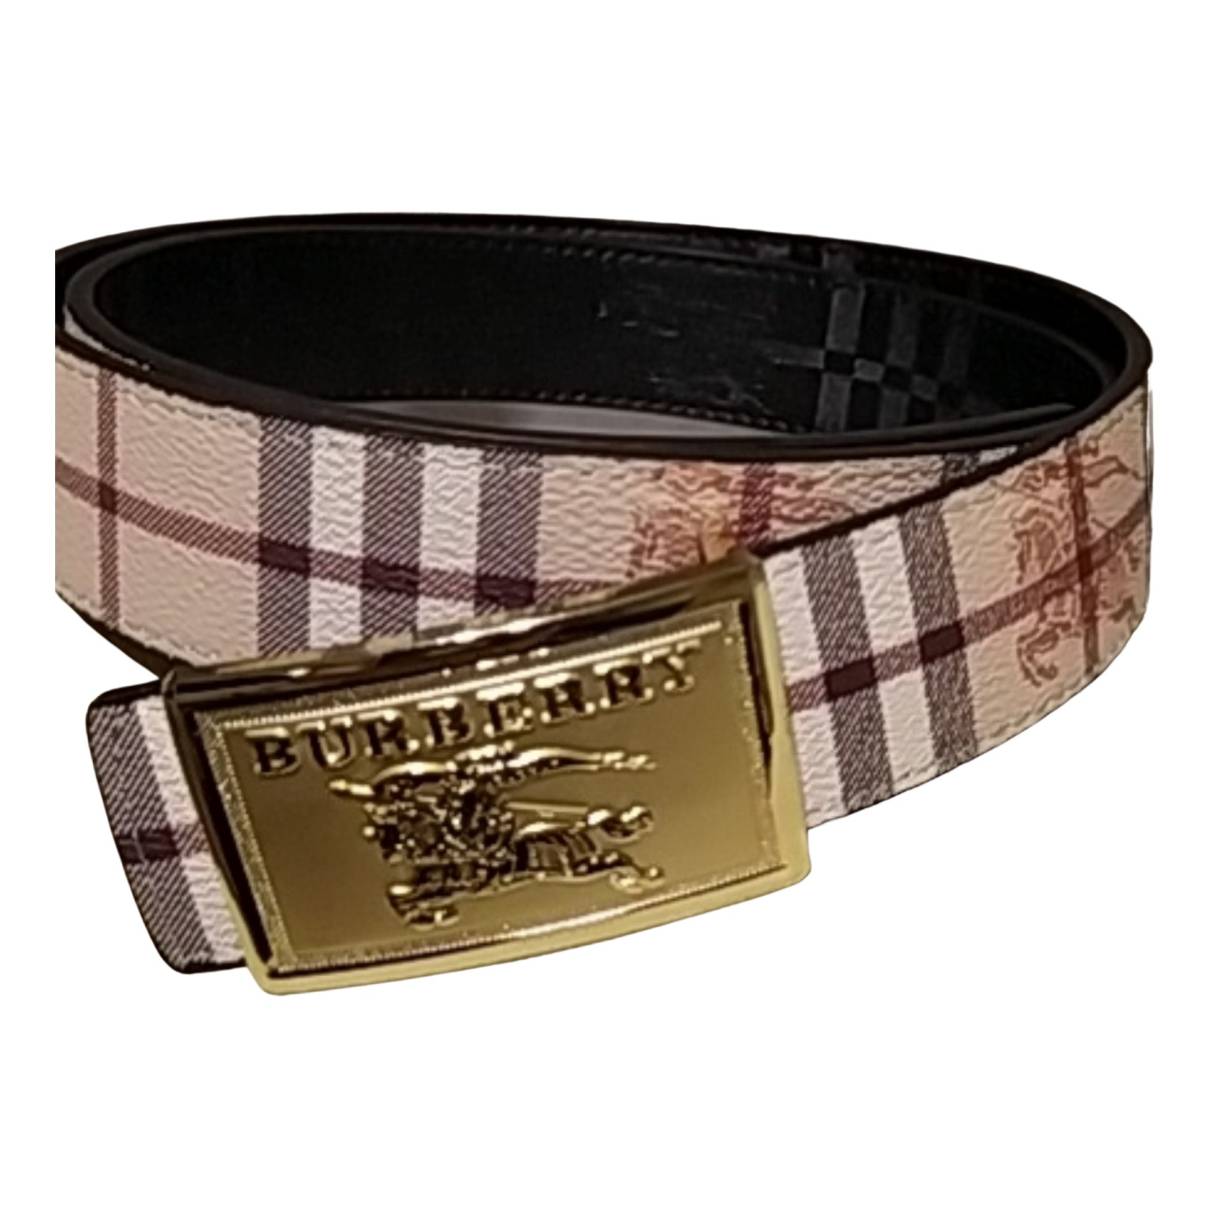 Burberry, Accessories, Mens Burberry Horse Check Leather Belt